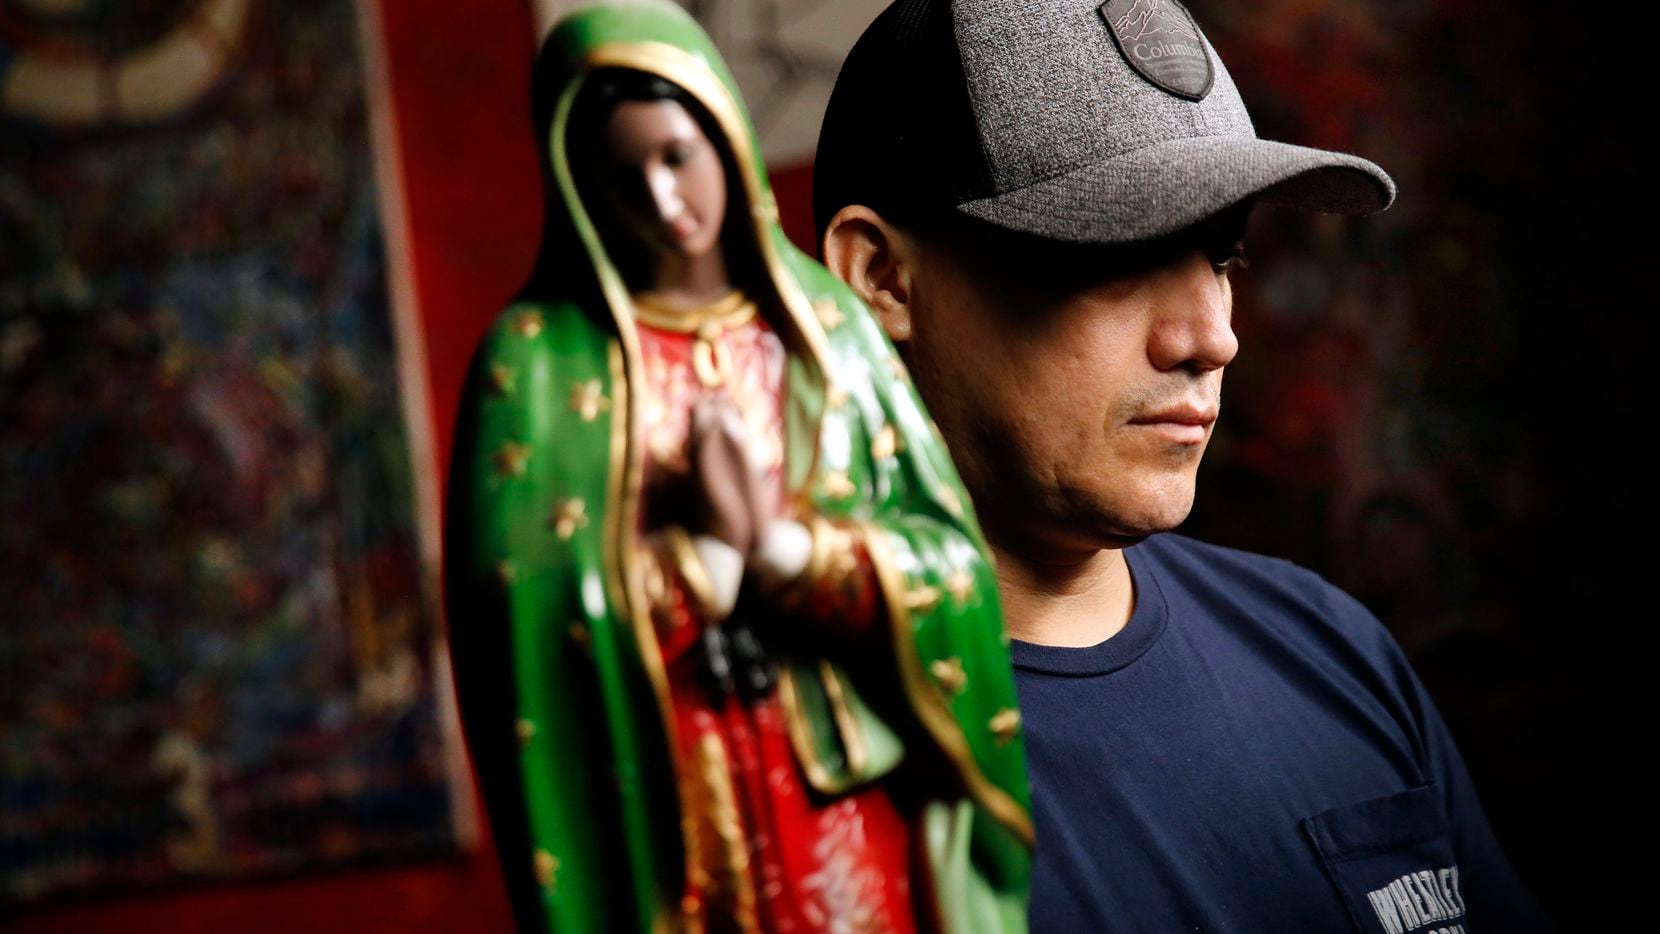 Juan, an undocumented worker, husband and father of four, is pictured with a statue of the Virgin of Guadalupe at a restaurant and bar in Dallas. He said the Virgin is his favorite santos to pray to. During the coronavirus pandemic he is only working roughly half of his full-time hours as a cook and chef. But unlike other employees with legal status in the U.S., he can't apply for unemployment benefits.